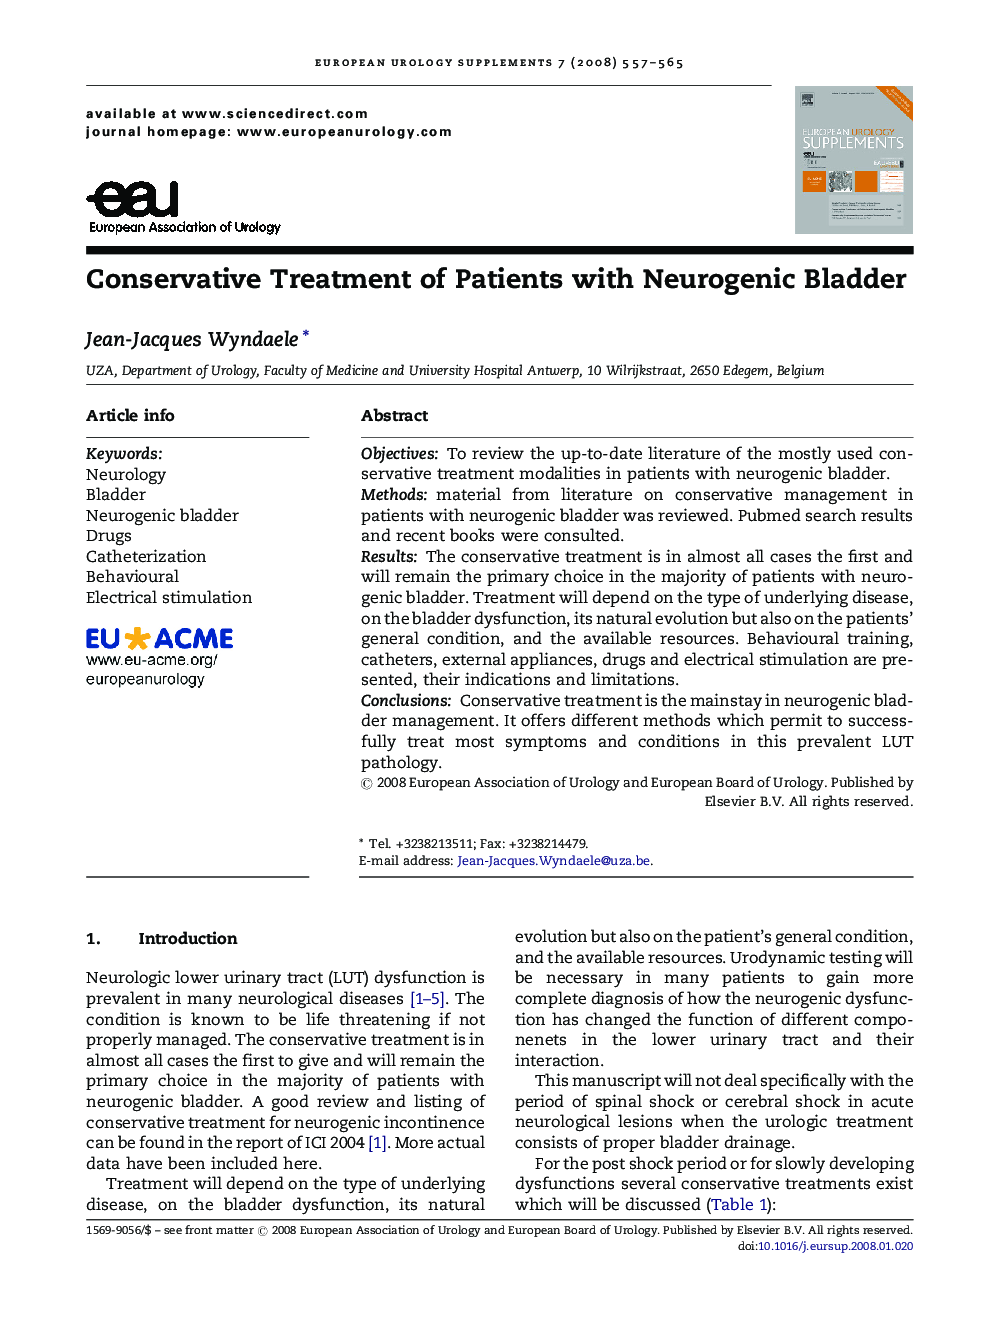 Conservative Treatment of Patients with Neurogenic Bladder